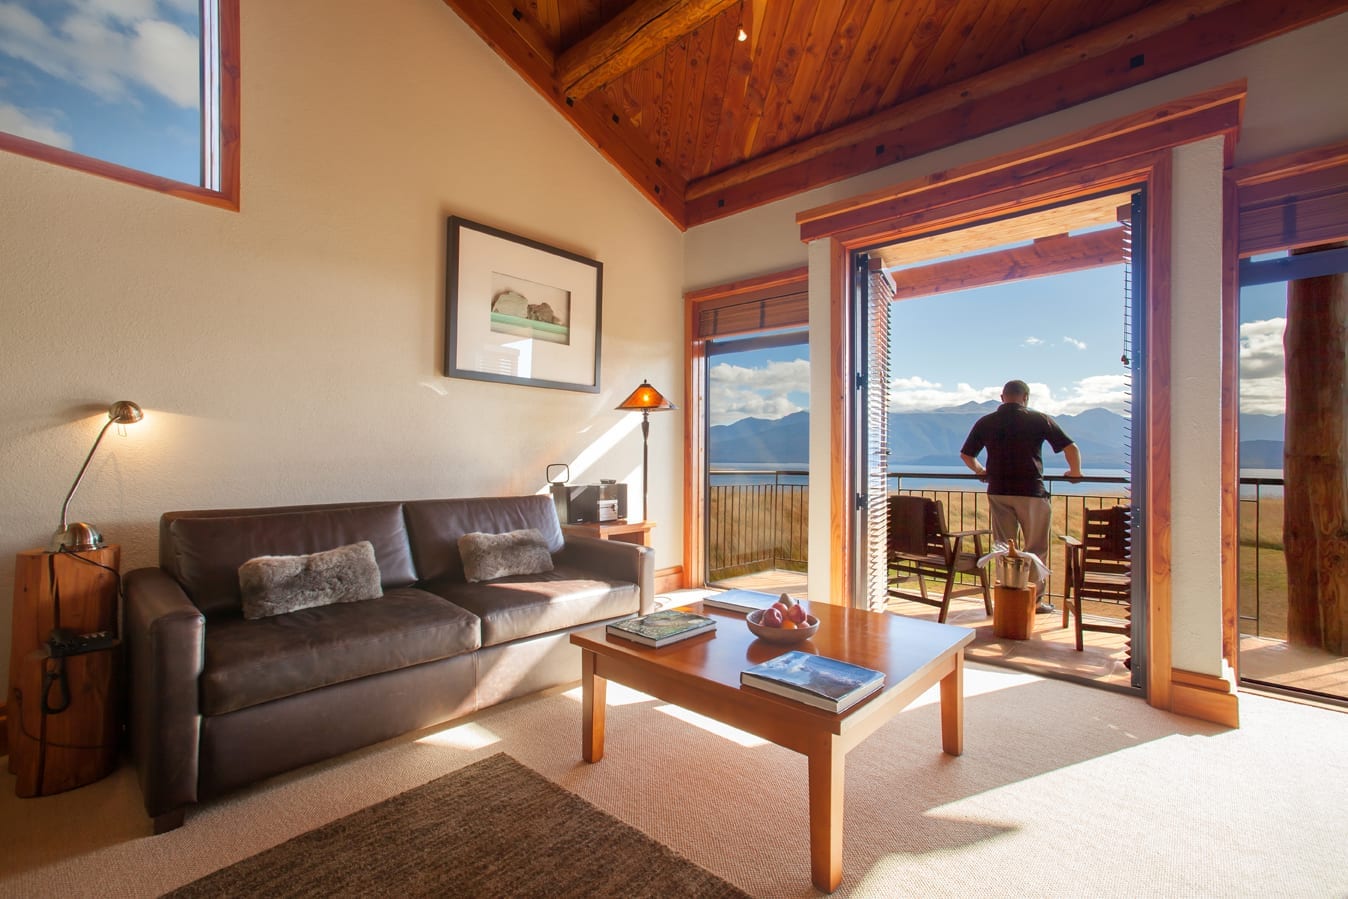 Your luxury stay at Fiordland Lodge